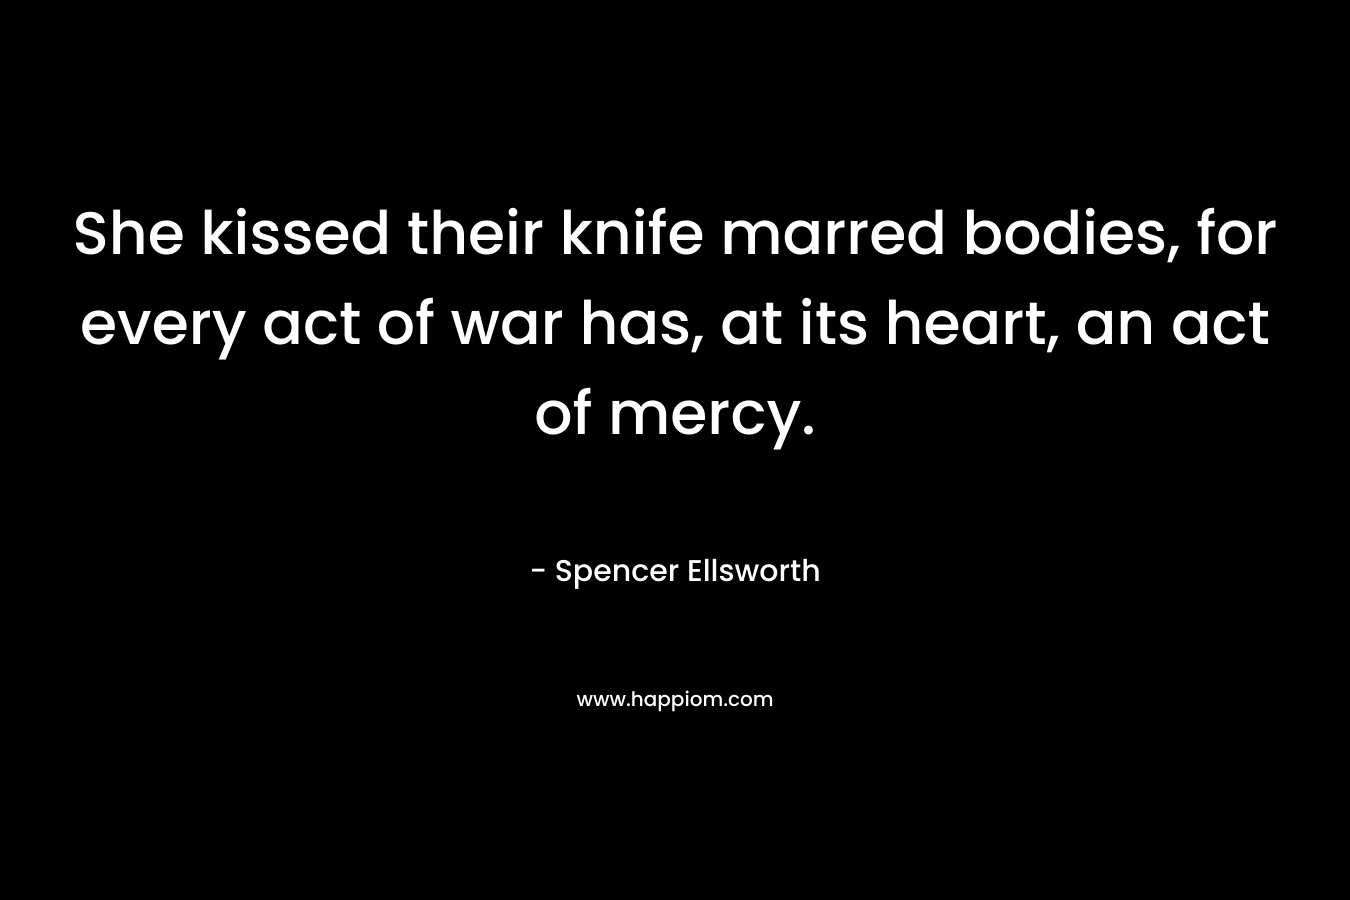 She kissed their knife marred bodies, for every act of war has, at its heart, an act of mercy. – Spencer Ellsworth